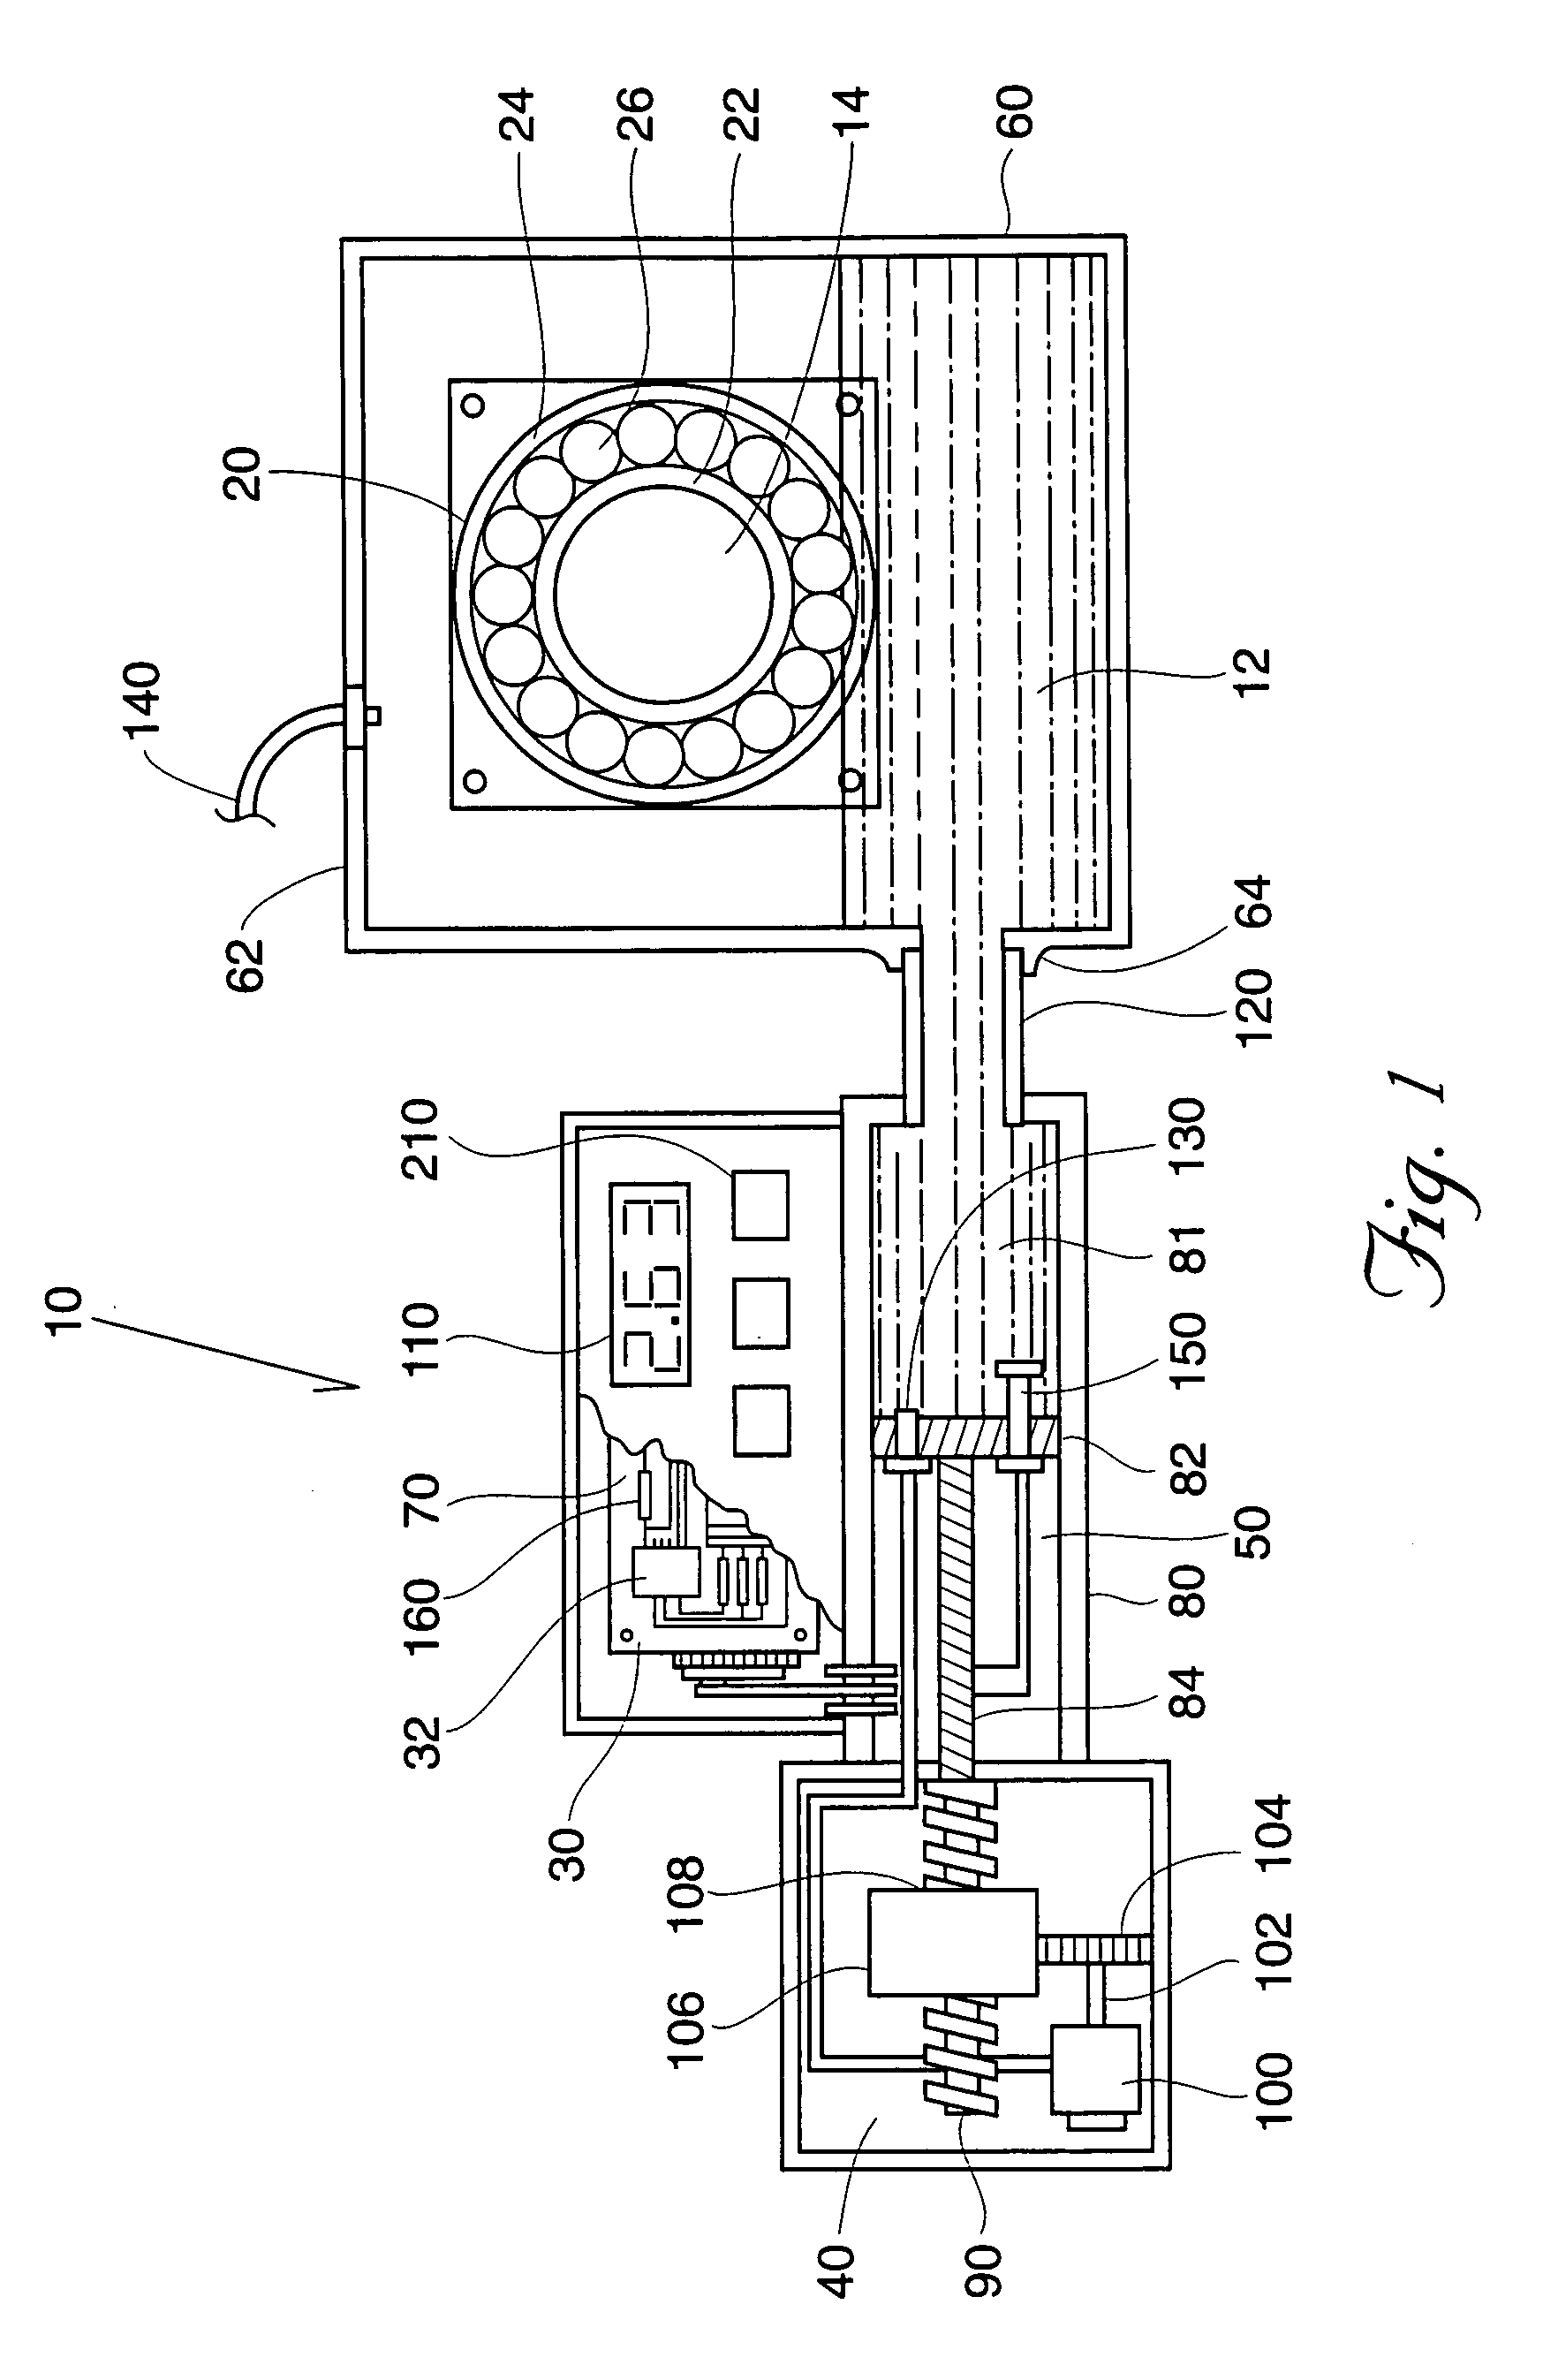 Apparatus and method for lubricant condition control and monitoring